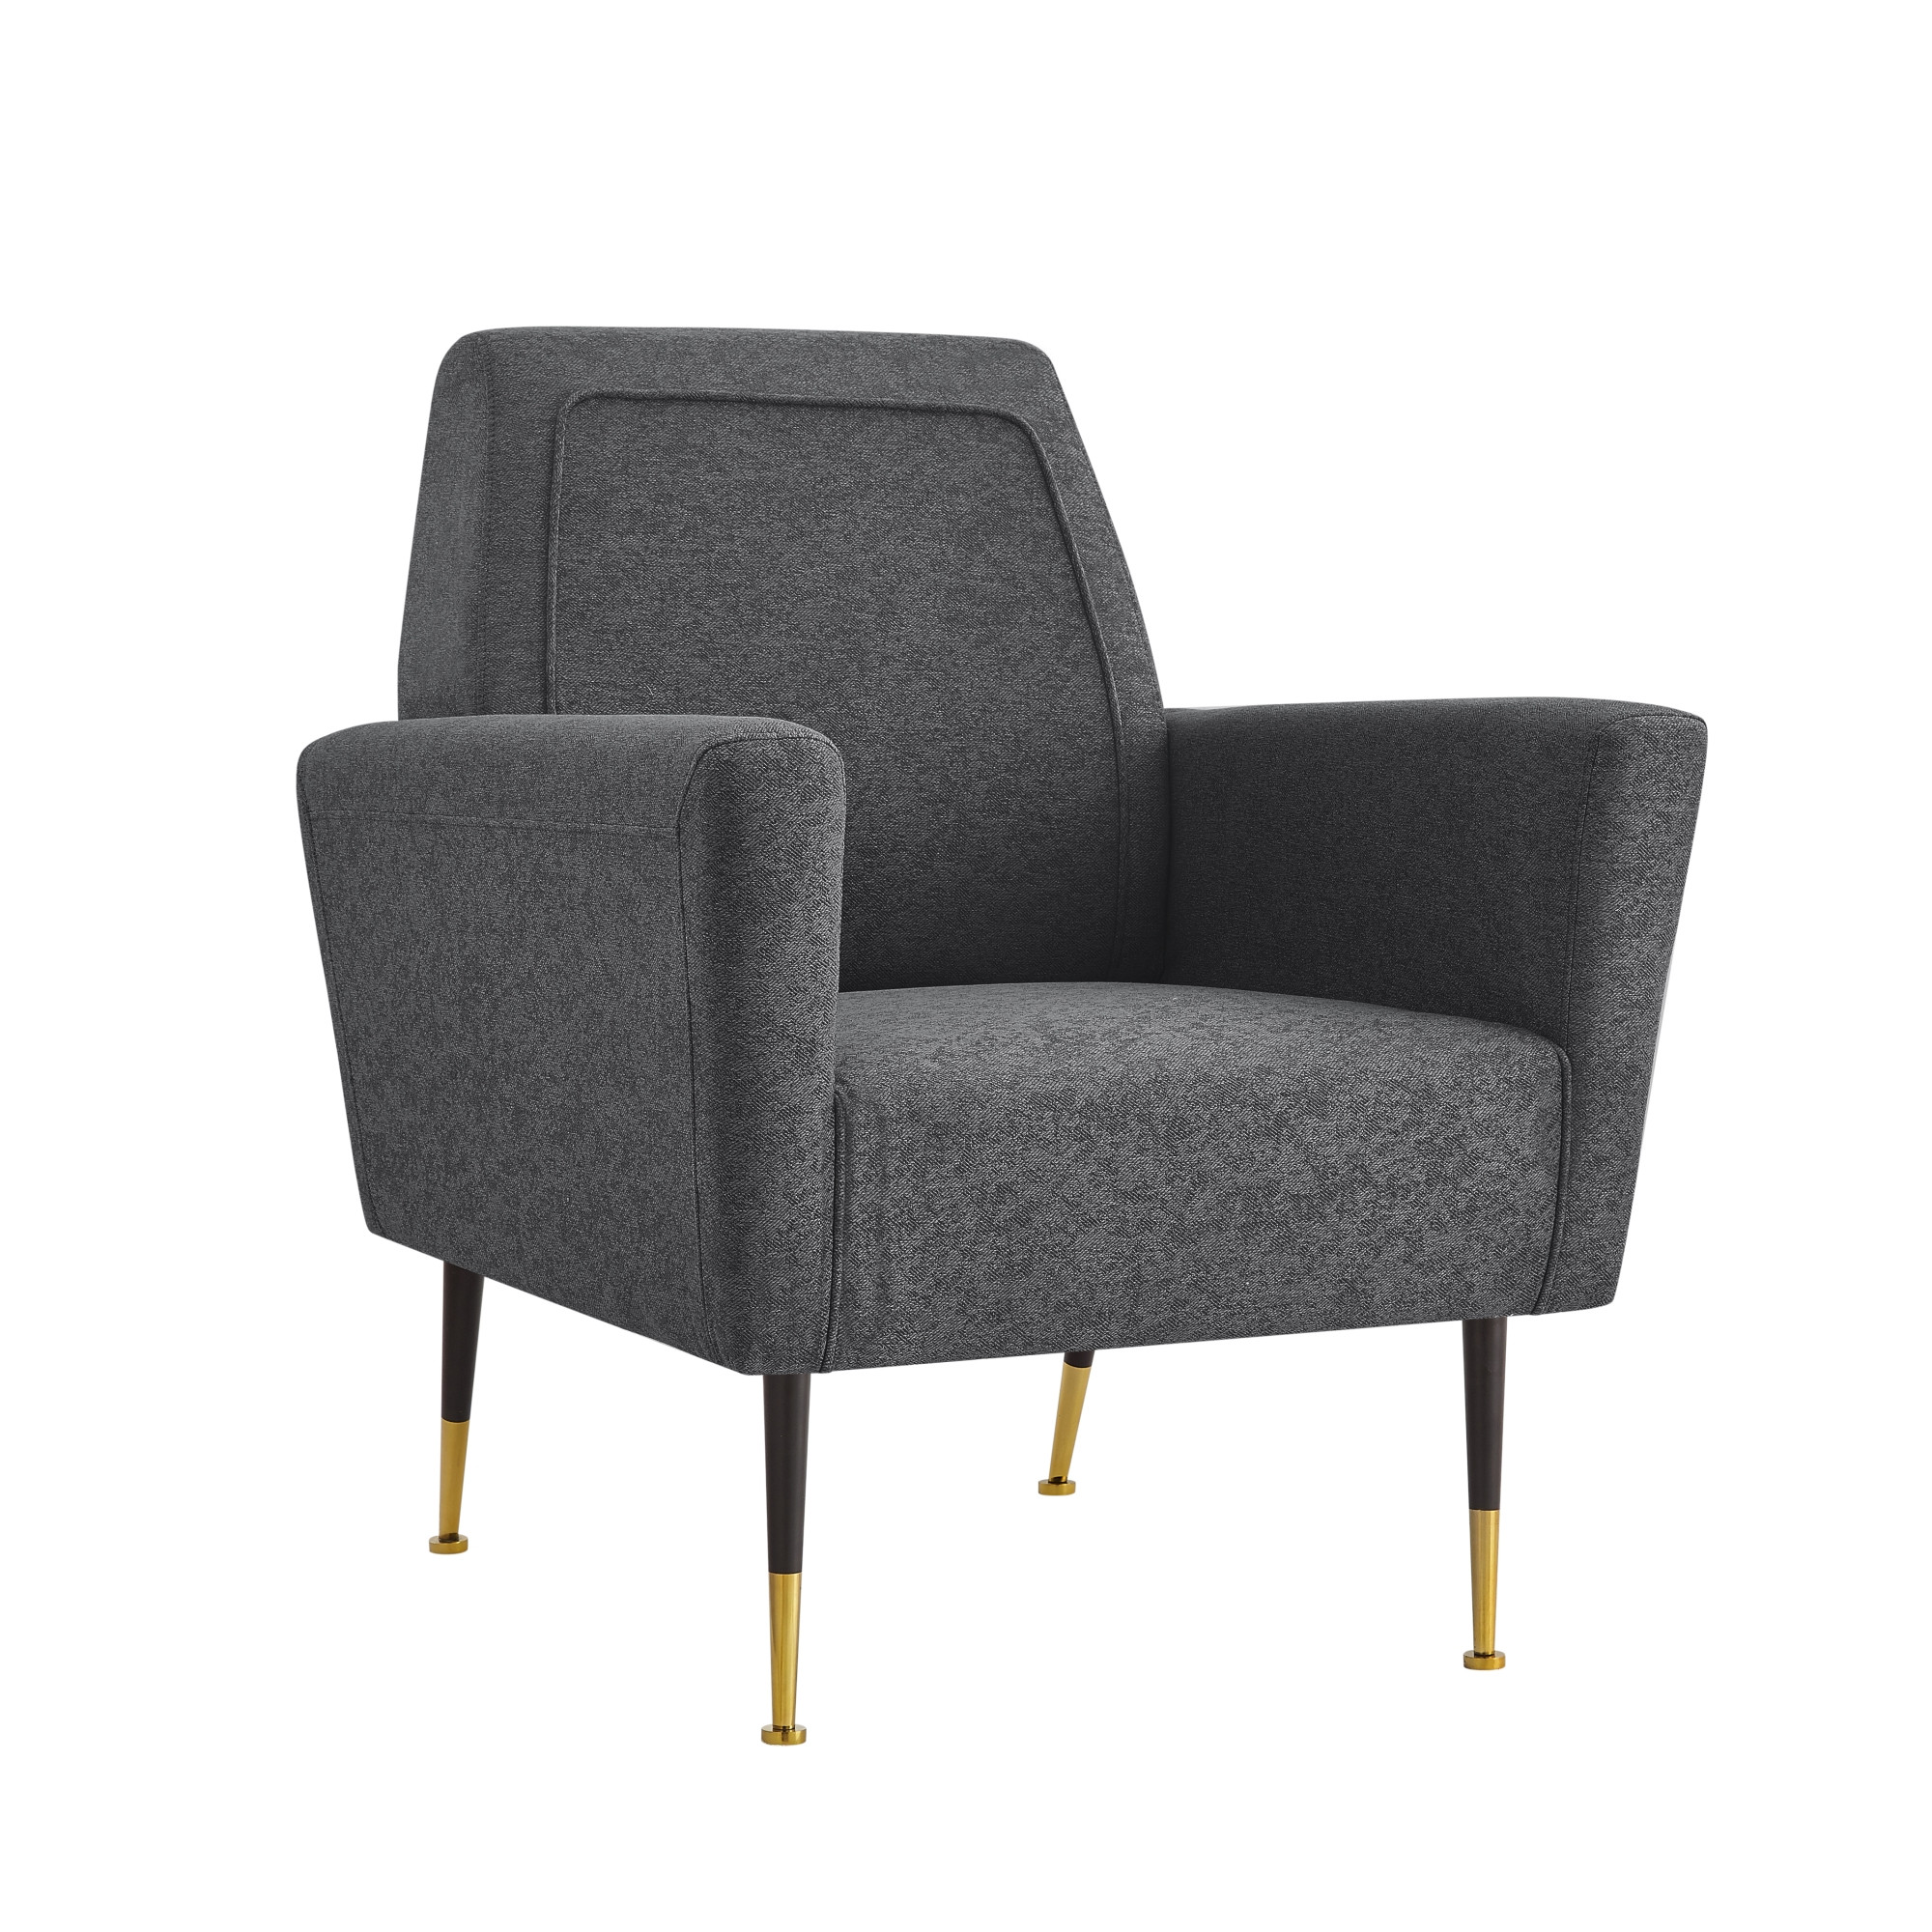 32" Dark Gray And Gold Linen Arm Chair-533827-1